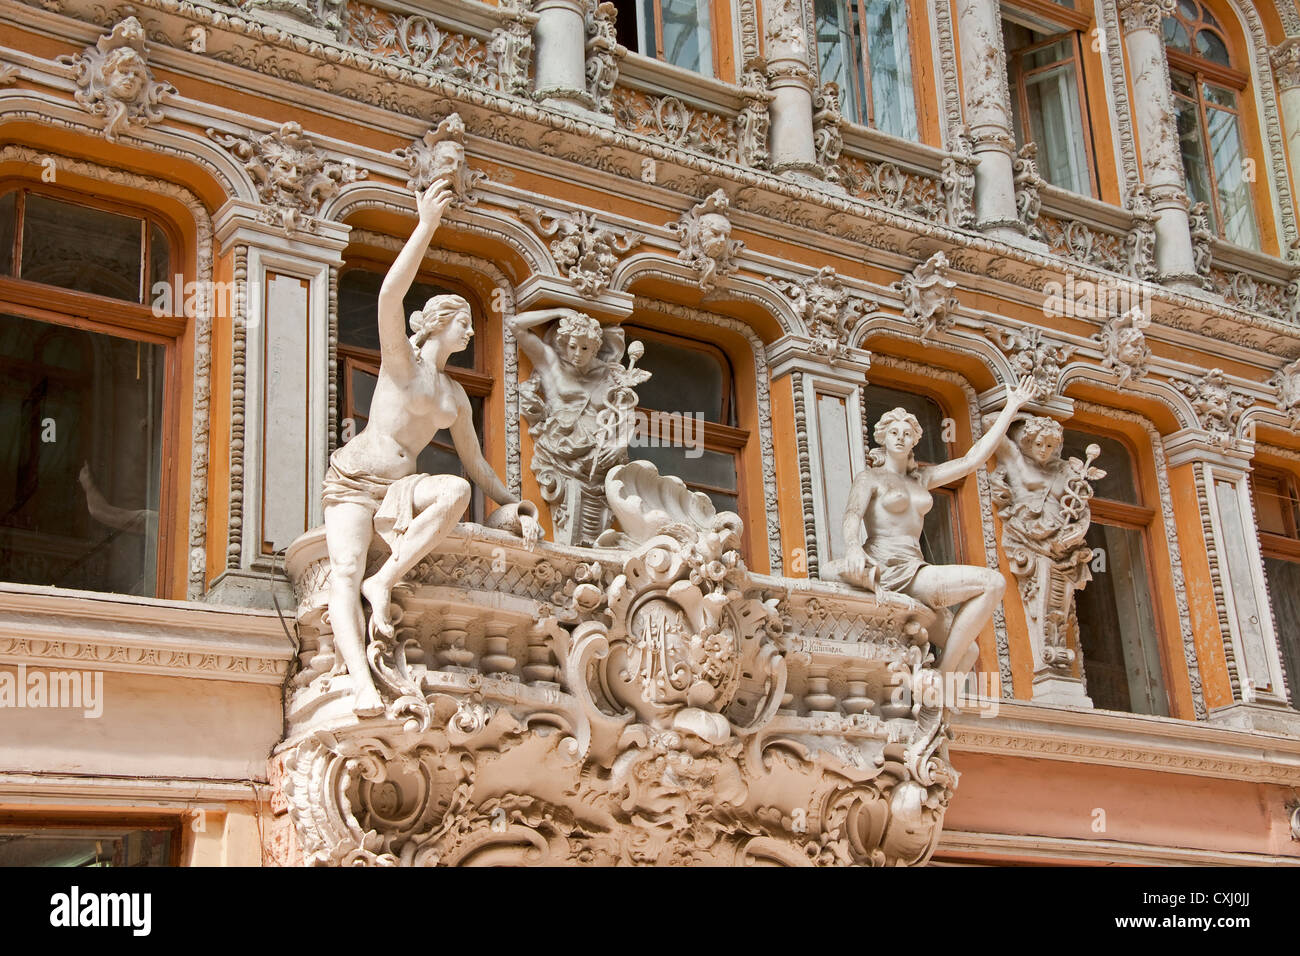 Detail of Odessa Passage shopping arcade in Baroque style. Stock Photo